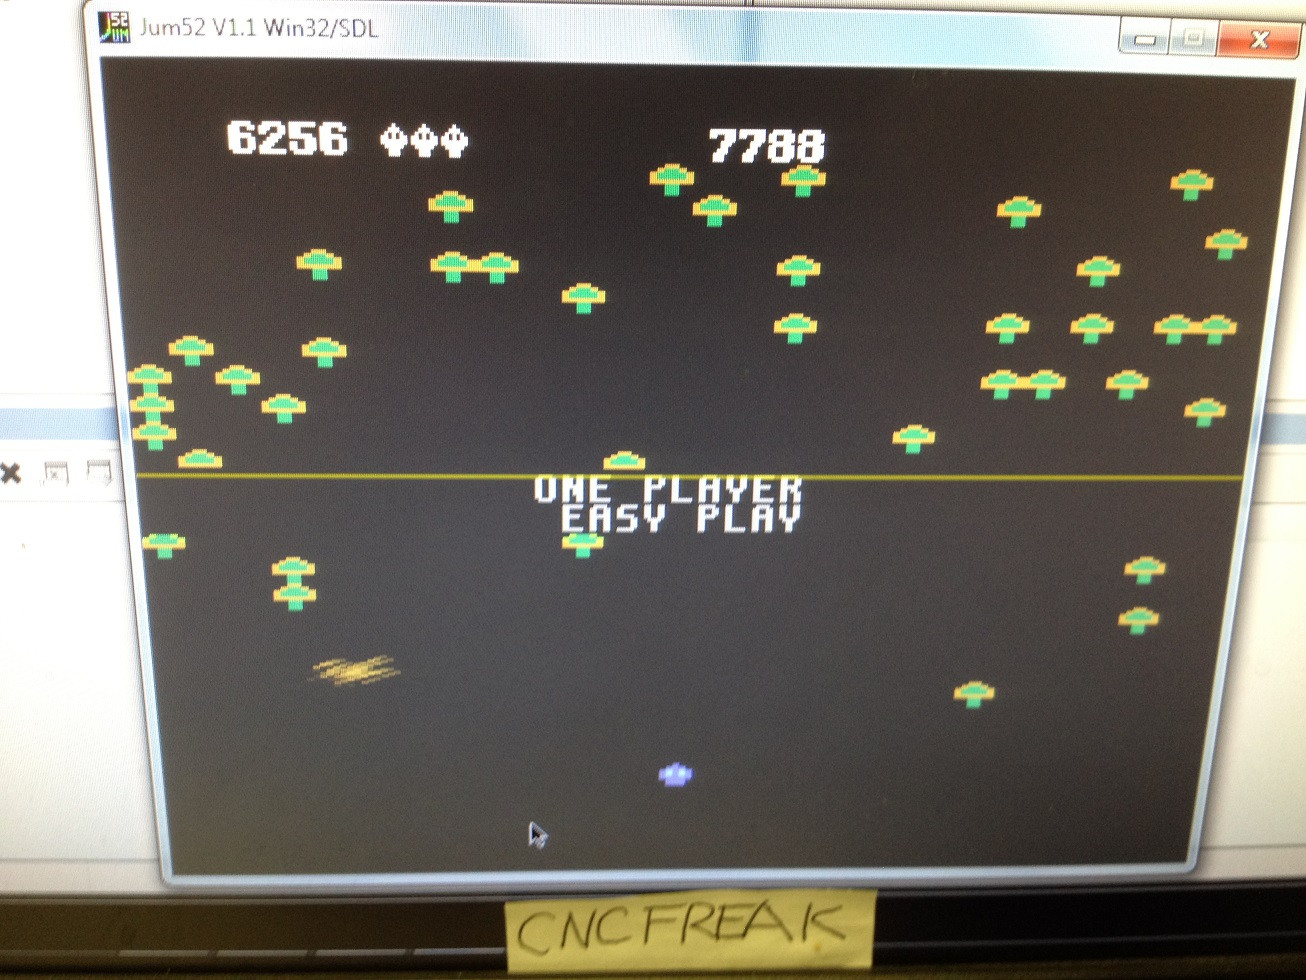 cncfreak: Centipede: Easy (Atari 5200 Emulated) 6,256 points on 2013-10-14 14:40:00